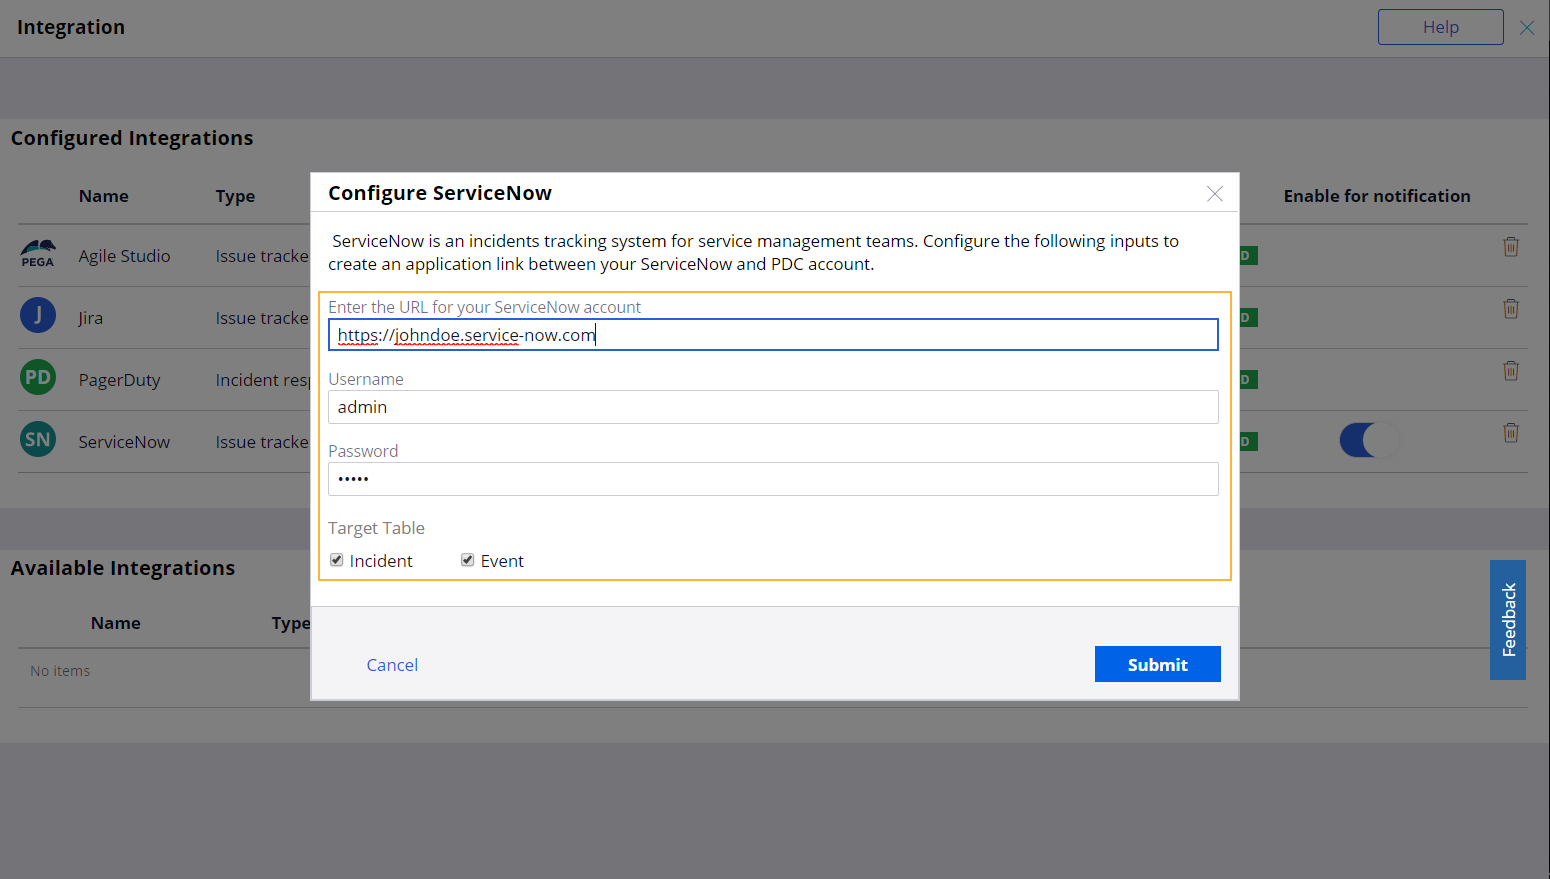 "Configure ServiceNow window with an example configuration of ServiceNow integration"